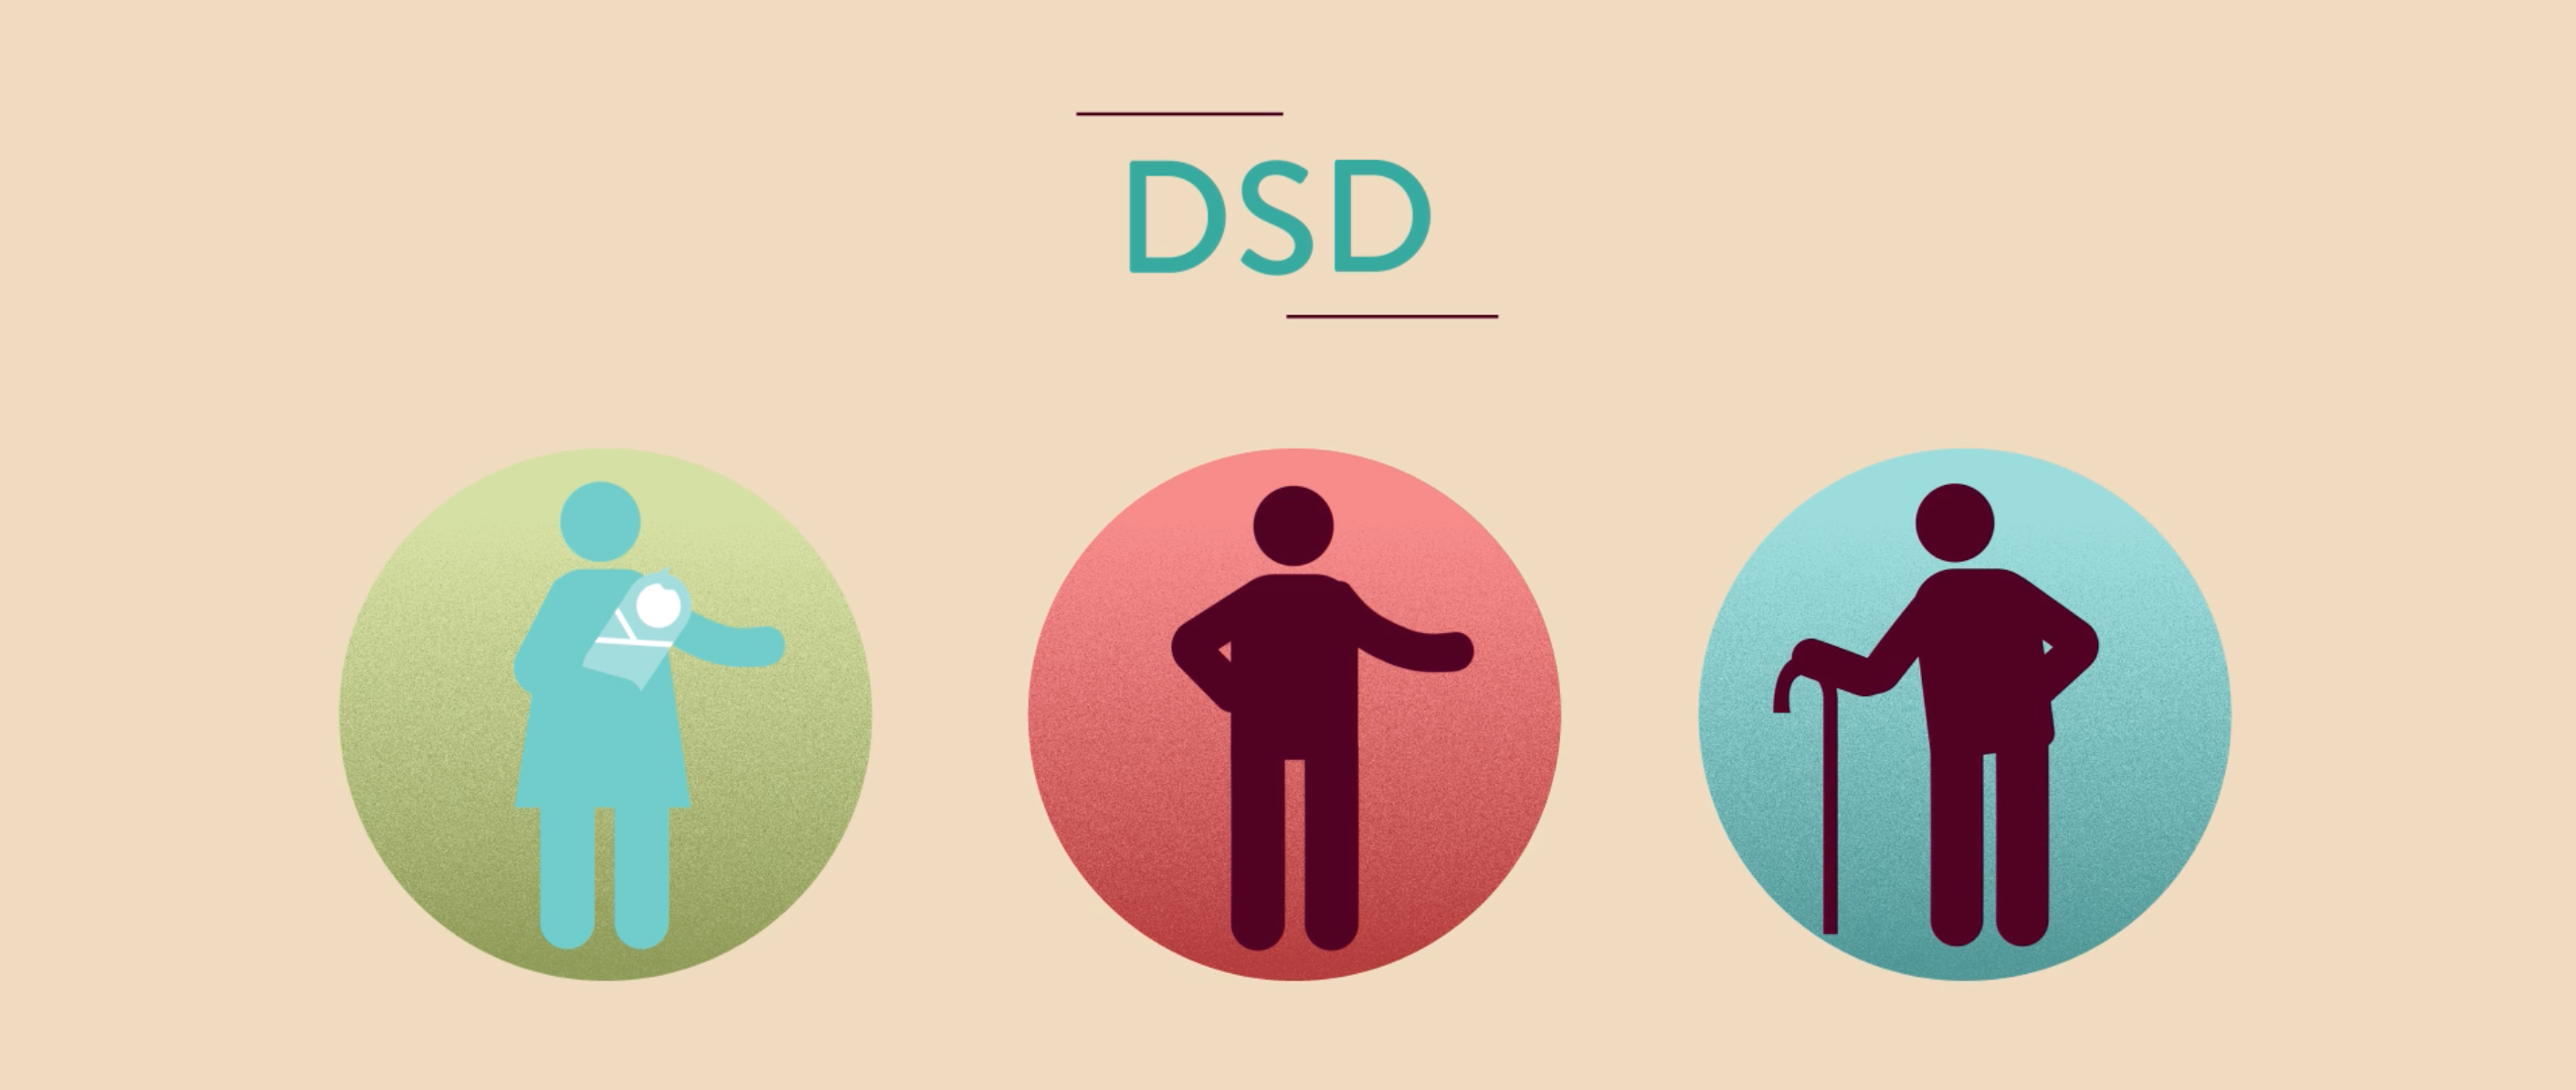 WHAT IS DIFFERENTIATED SERVICE DELIVERY? | Now You Know